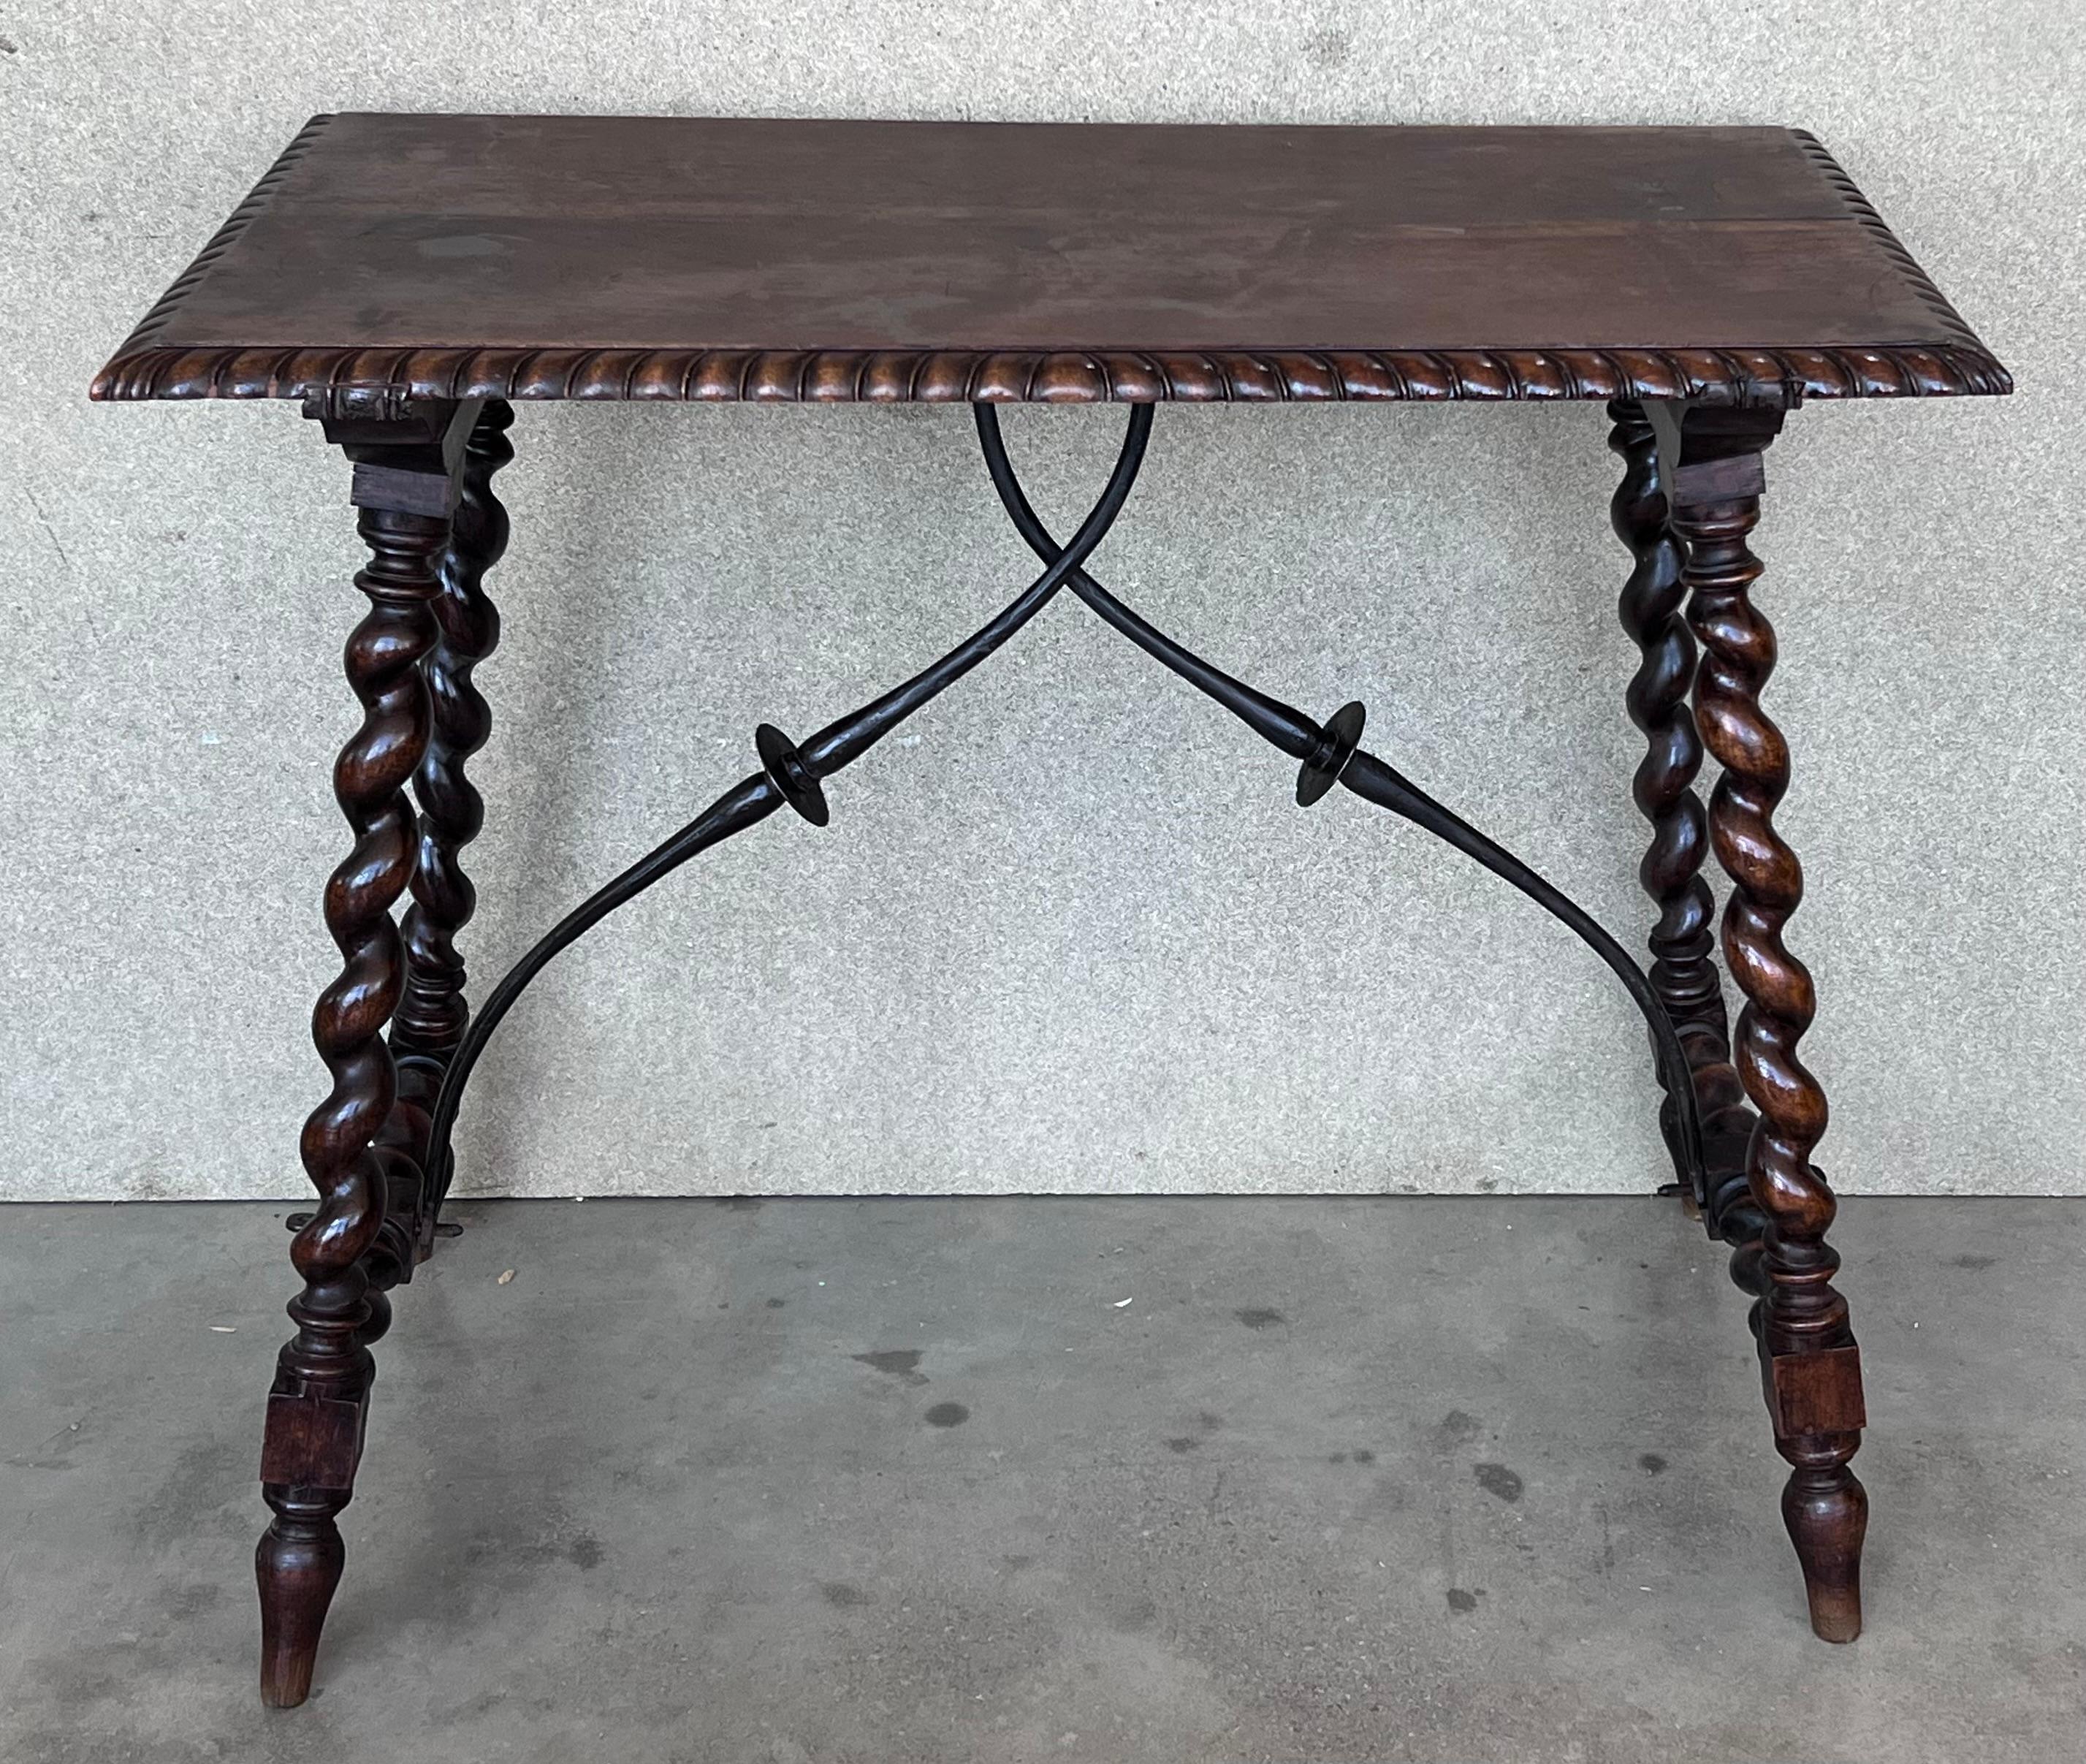 19th Spanish side table with cared Solomonic turned legs and iron stretcher.
The top has a carved edges and a beautiful grain and patina.